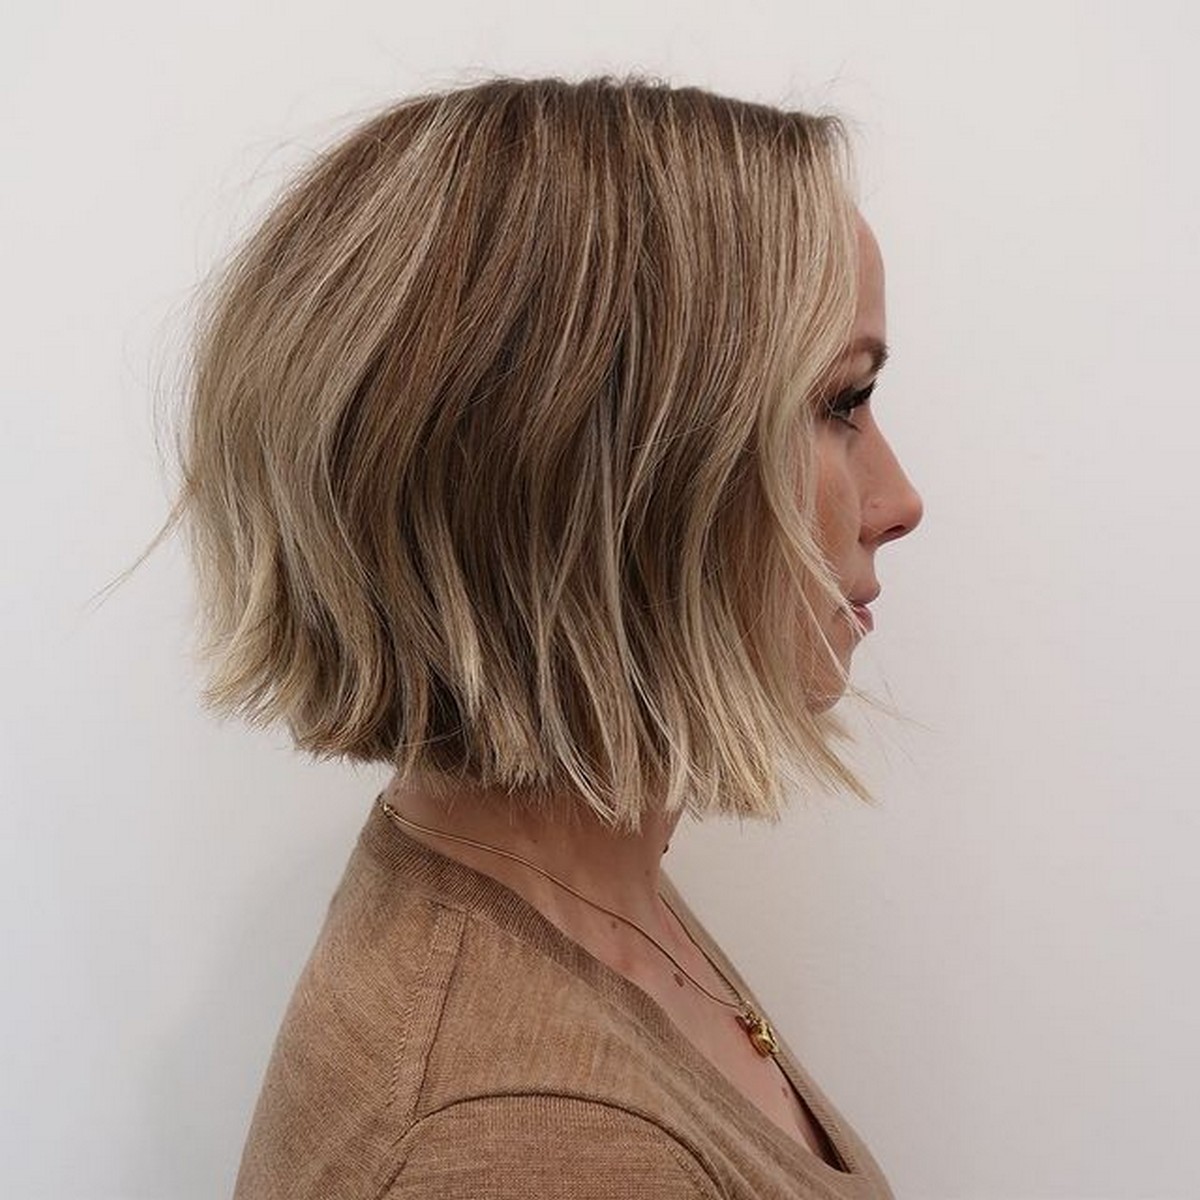 Neck-Length Bob With Blonde Highlights